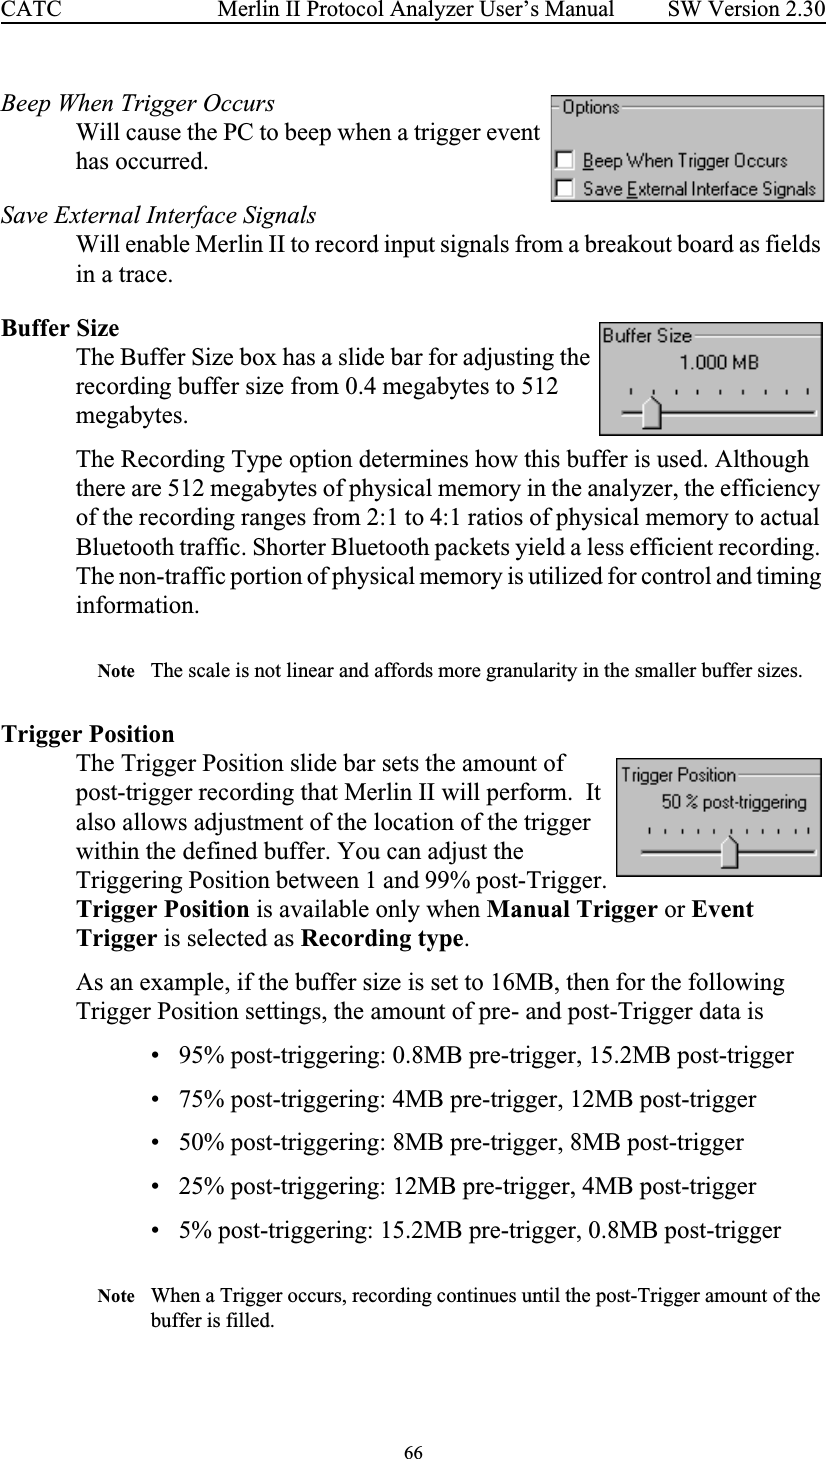 66 Merlin II Protocol Analyzer User’s ManualCATC SW Version 2.30Beep When Trigger Occurs Will cause the PC to beep when a trigger event has occurred.Save External Interface SignalsWill enable Merlin II to record input signals from a breakout board as fields in a trace.Buffer SizeThe Buffer Size box has a slide bar for adjusting the recording buffer size from 0.4 megabytes to 512 megabytes. The Recording Type option determines how this buffer is used. Although there are 512 megabytes of physical memory in the analyzer, the efficiency of the recording ranges from 2:1 to 4:1 ratios of physical memory to actual Bluetooth traffic. Shorter Bluetooth packets yield a less efficient recording. The non-traffic portion of physical memory is utilized for control and timing information.Note The scale is not linear and affords more granularity in the smaller buffer sizes. Trigger PositionThe Trigger Position slide bar sets the amount of post-trigger recording that Merlin II will perform.  It also allows adjustment of the location of the trigger within the defined buffer. You can adjust the Triggering Position between 1 and 99% post-Trigger. Trigger Position is available only when Manual Trigger or Event Trigger is selected as Recording type.As an example, if the buffer size is set to 16MB, then for the following Trigger Position settings, the amount of pre- and post-Trigger data is• 95% post-triggering: 0.8MB pre-trigger, 15.2MB post-trigger• 75% post-triggering: 4MB pre-trigger, 12MB post-trigger• 50% post-triggering: 8MB pre-trigger, 8MB post-trigger • 25% post-triggering: 12MB pre-trigger, 4MB post-trigger• 5% post-triggering: 15.2MB pre-trigger, 0.8MB post-triggerNote When a Trigger occurs, recording continues until the post-Trigger amount of the buffer is filled.